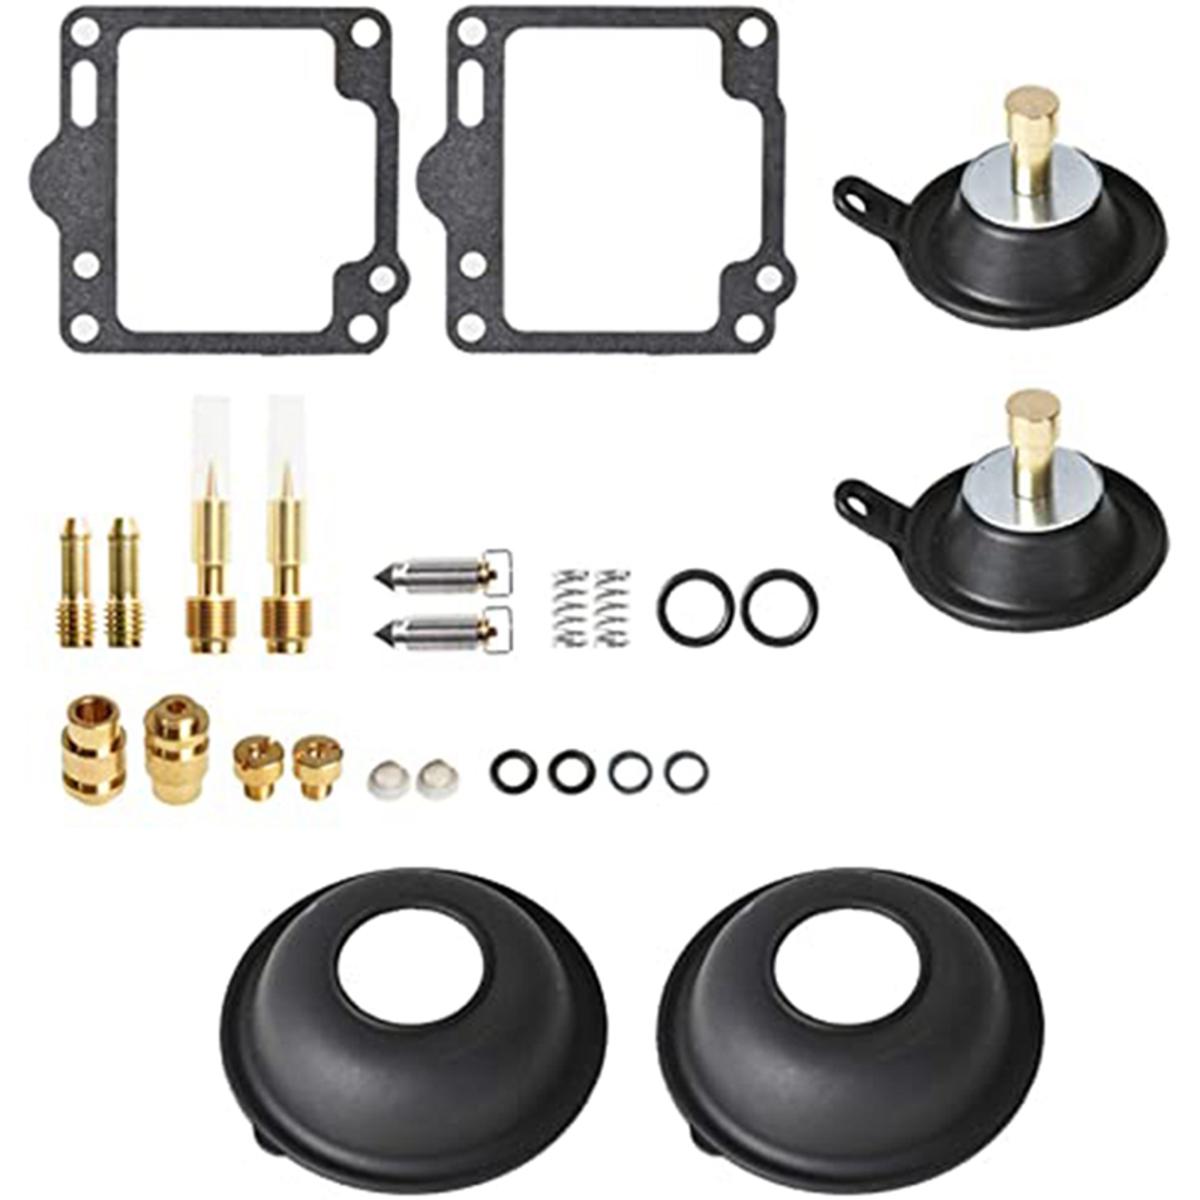 Metering Diaphragm Gasket Assembly for Walbro 95-526-9 95-526-9-8 WA WT WY  WZ Series Carburetor Pack of 30